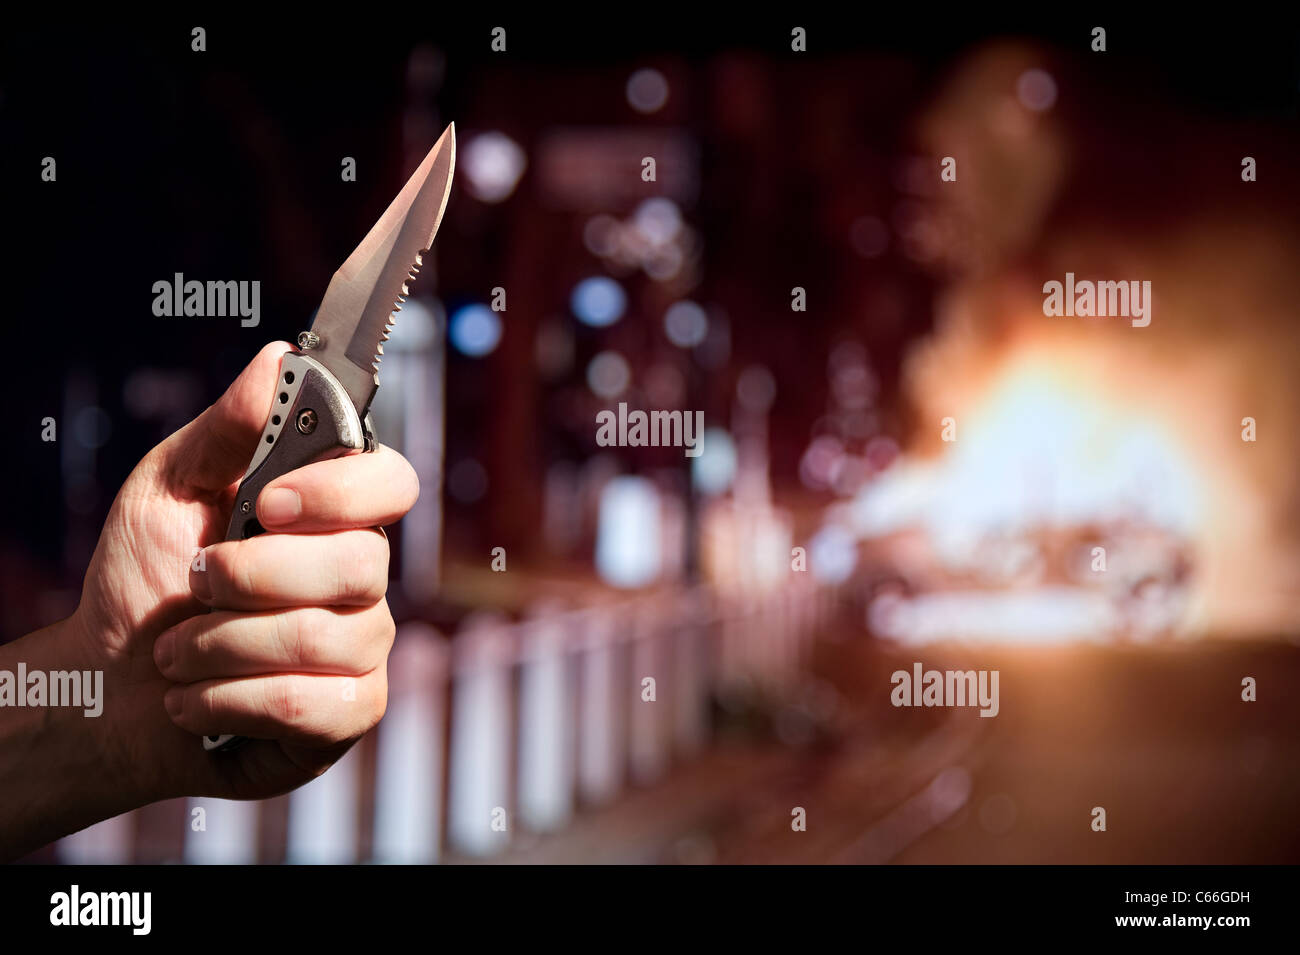 Knife Crime / Riots / Violence Concept. Hand holding a knife with a serrated edge while a car burns in the background. London UK Stock Photo